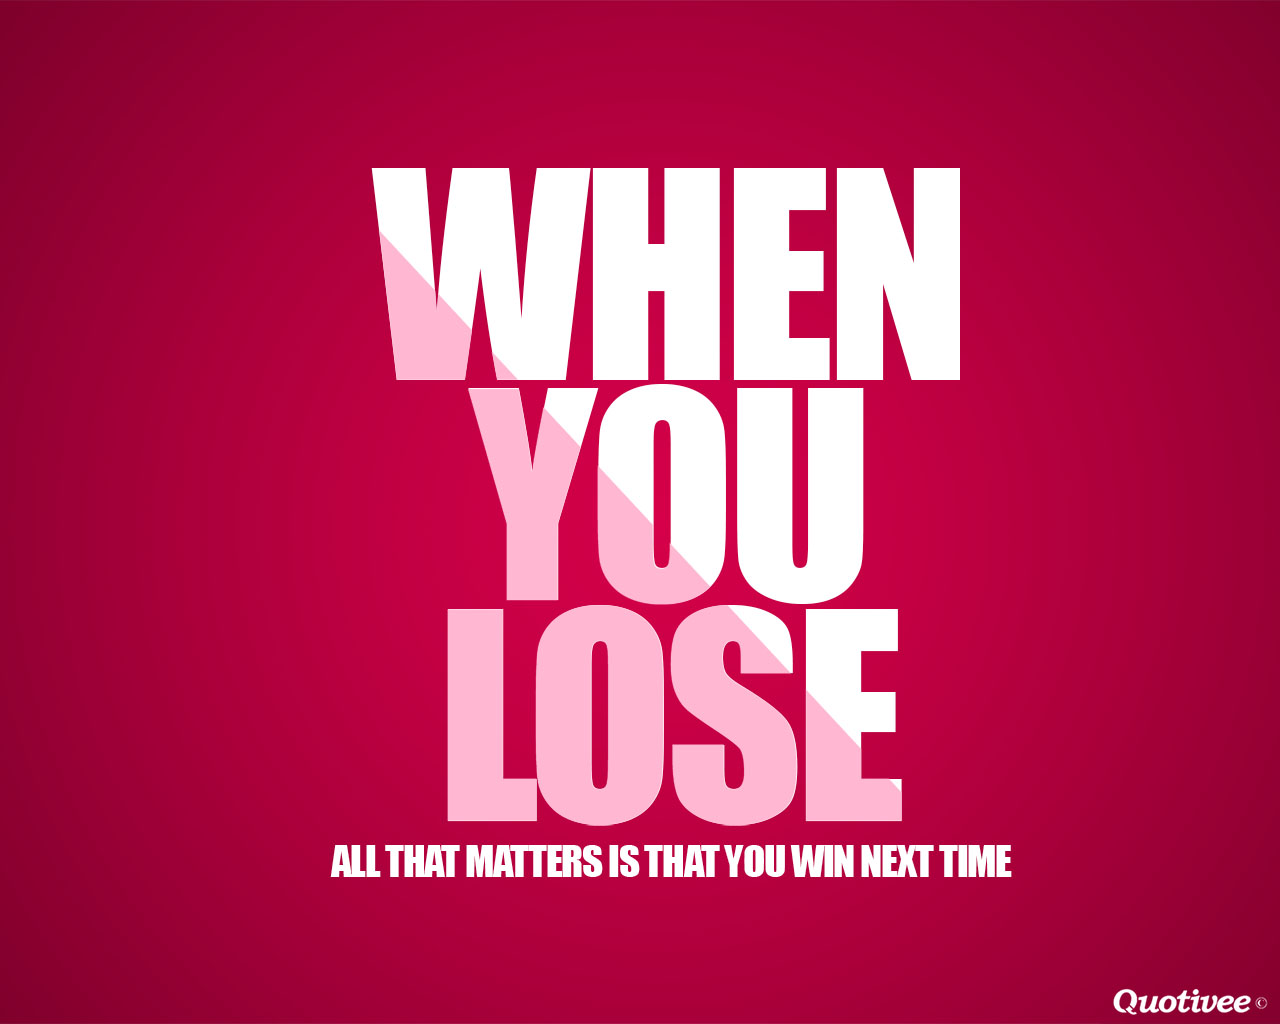 Motivational Wallpaper On Winning When You Lose All That Dont